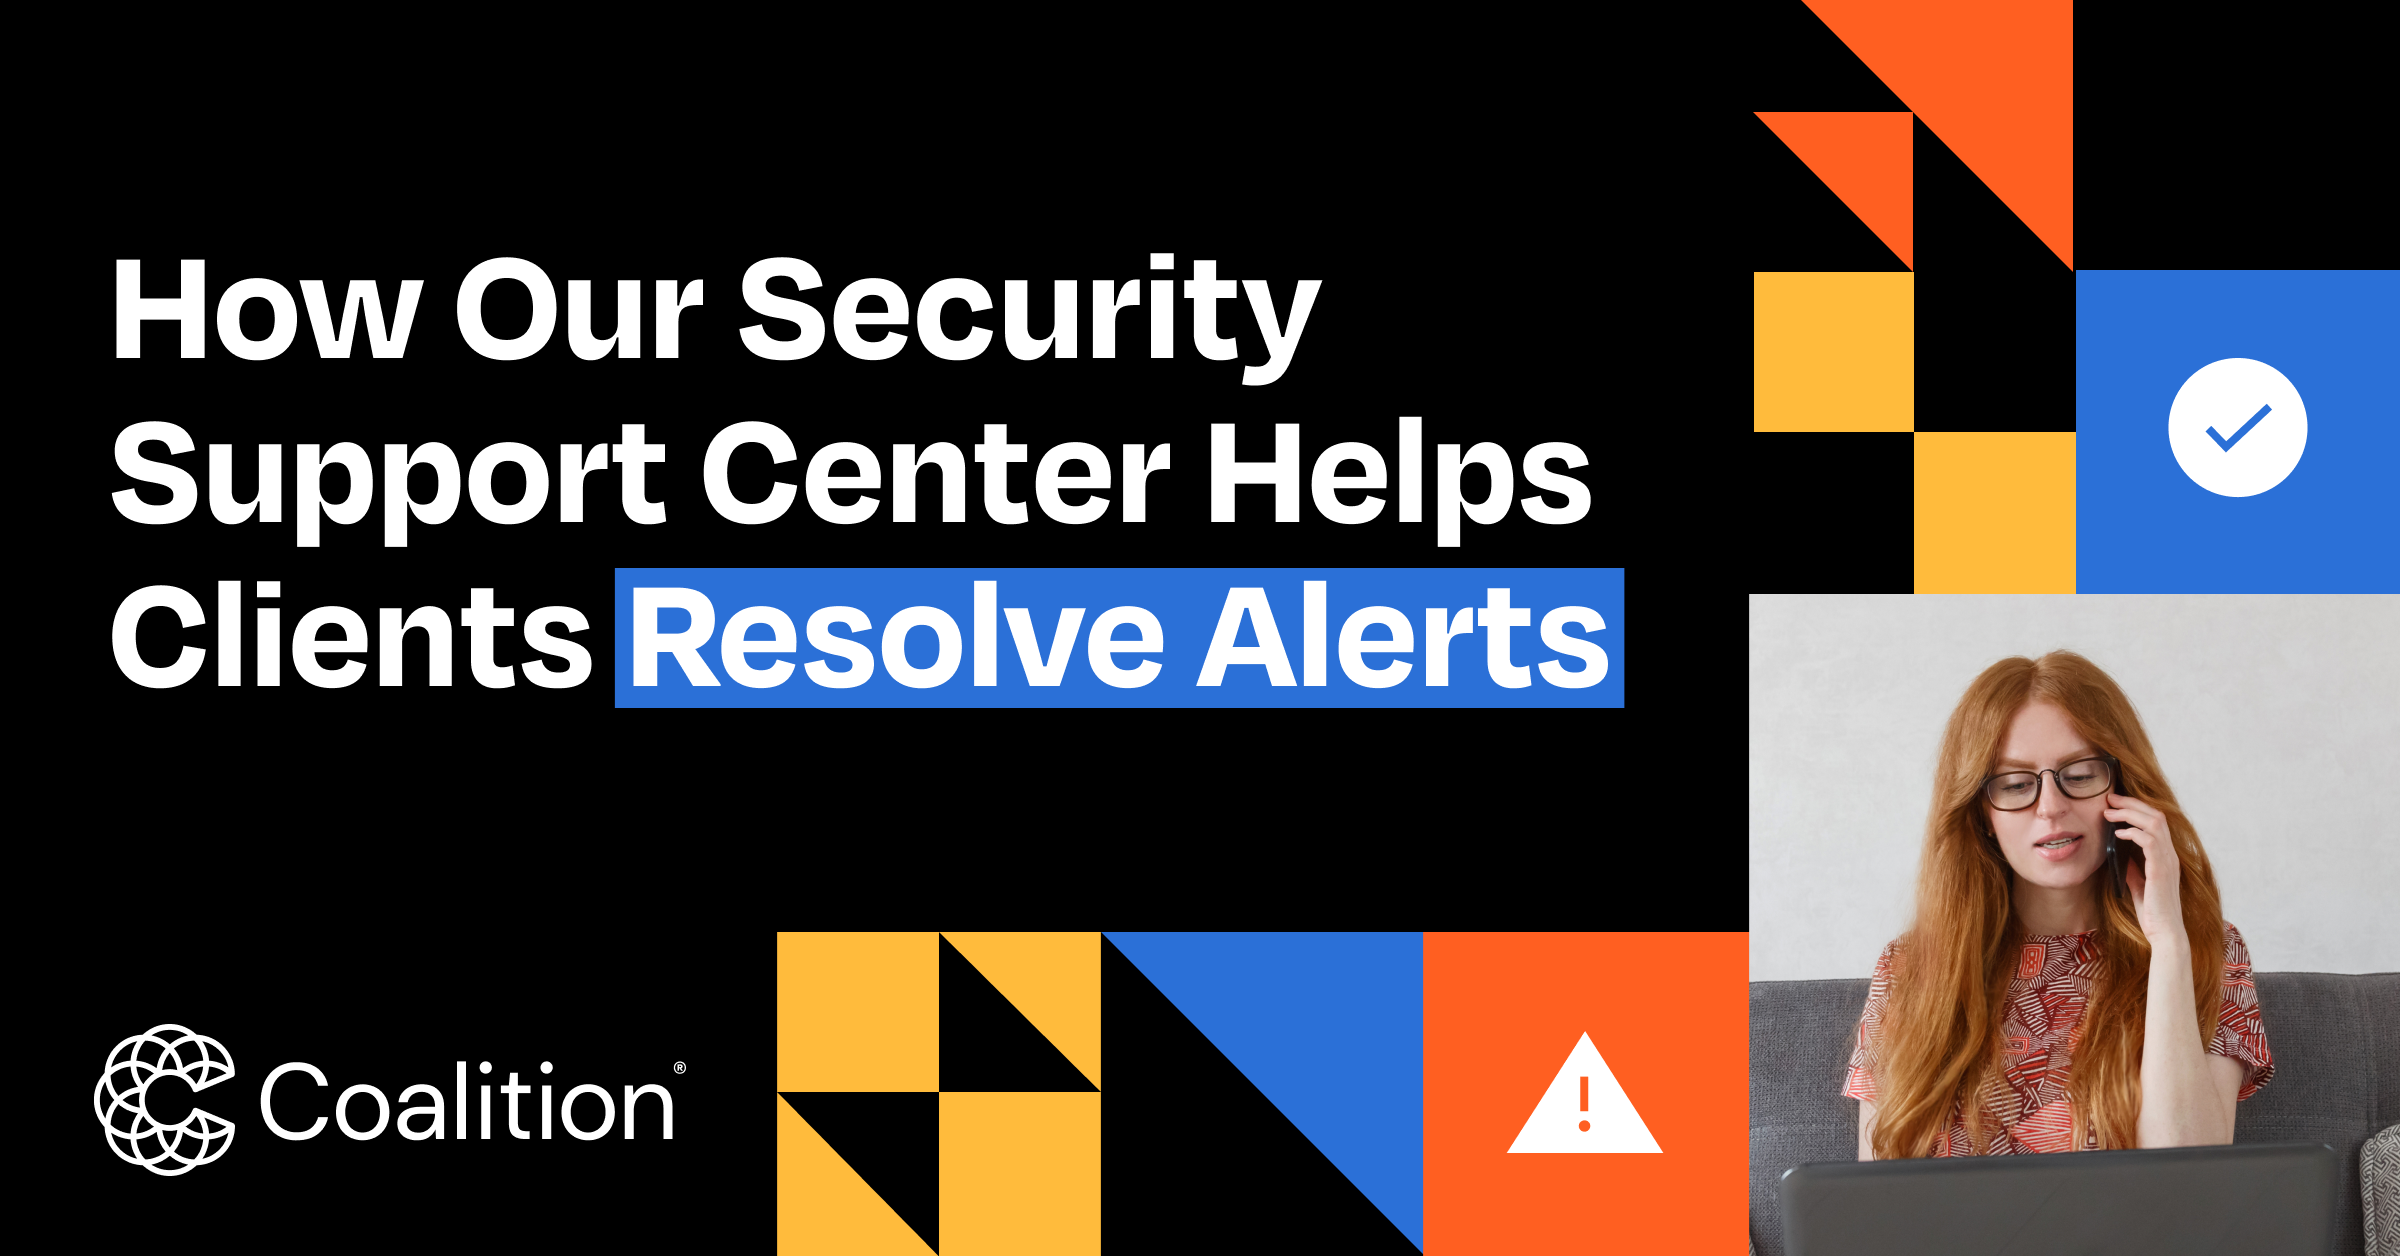 Blog: How Our Security Support Center Helps Clients Resolve Alerts 